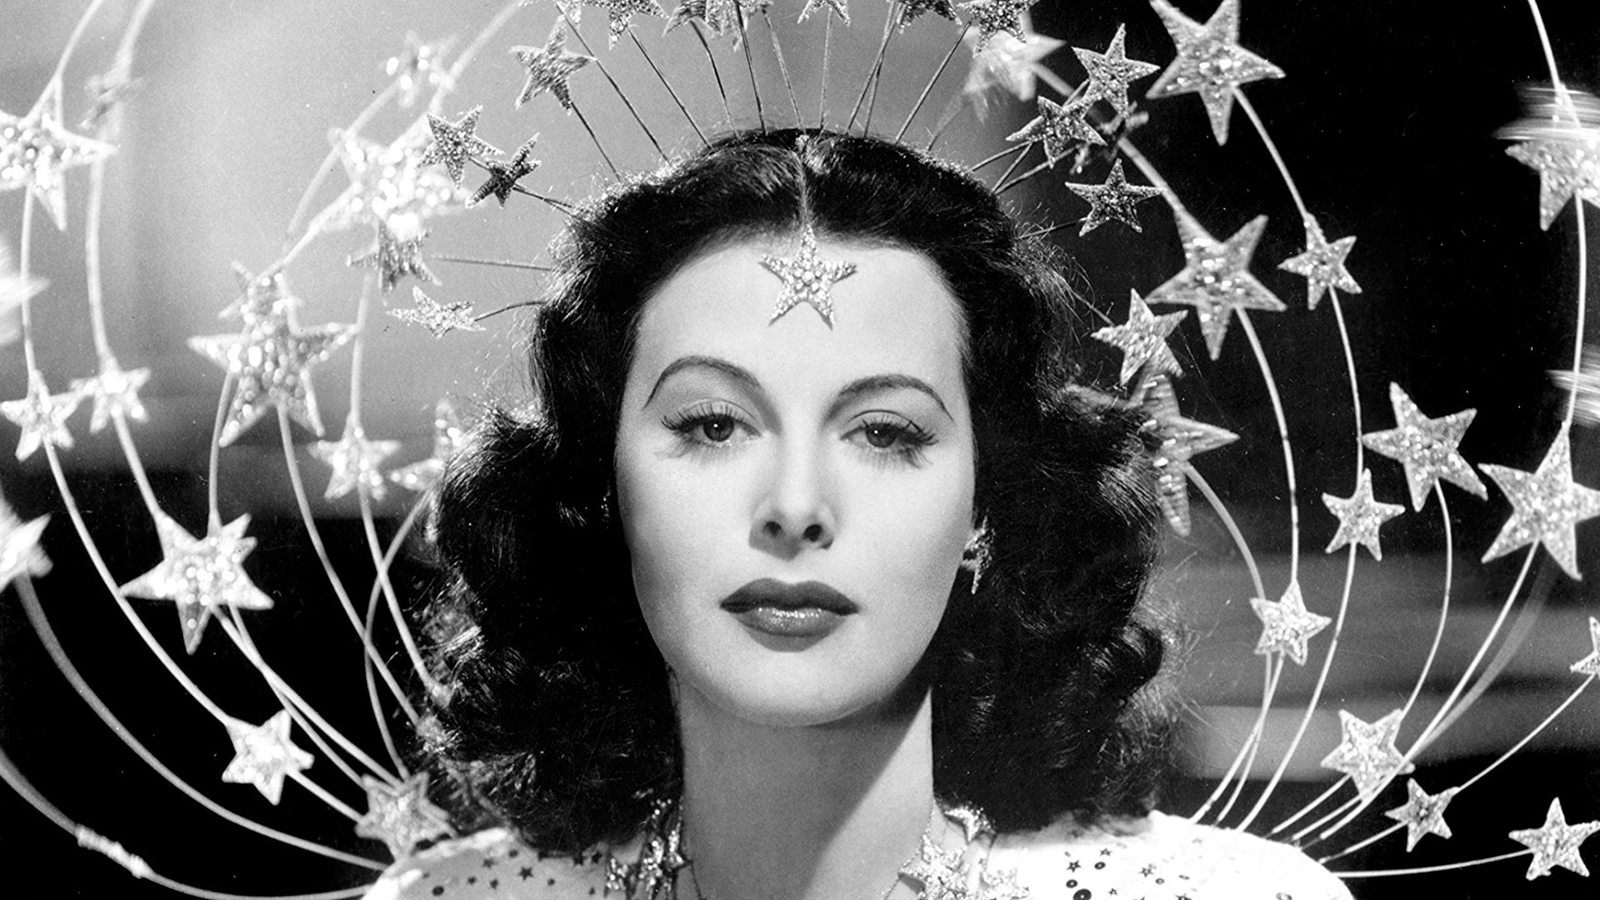 Bombshell: The Hedy Lamarr Story